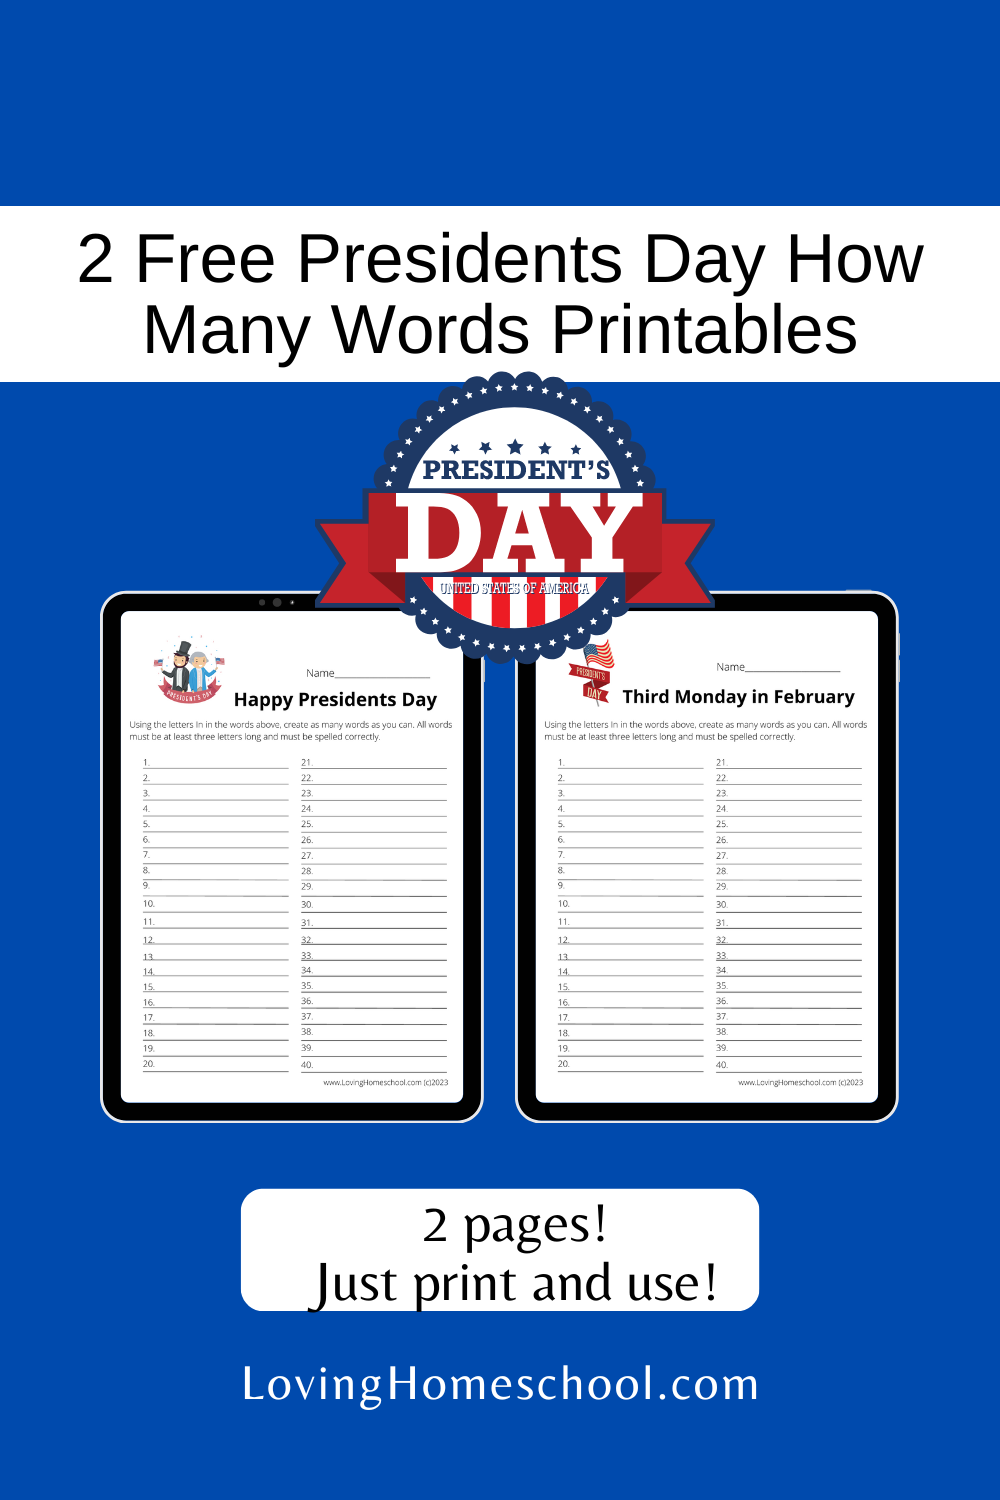 Free Presidents Day How Many Words Printables Pinterest Pin